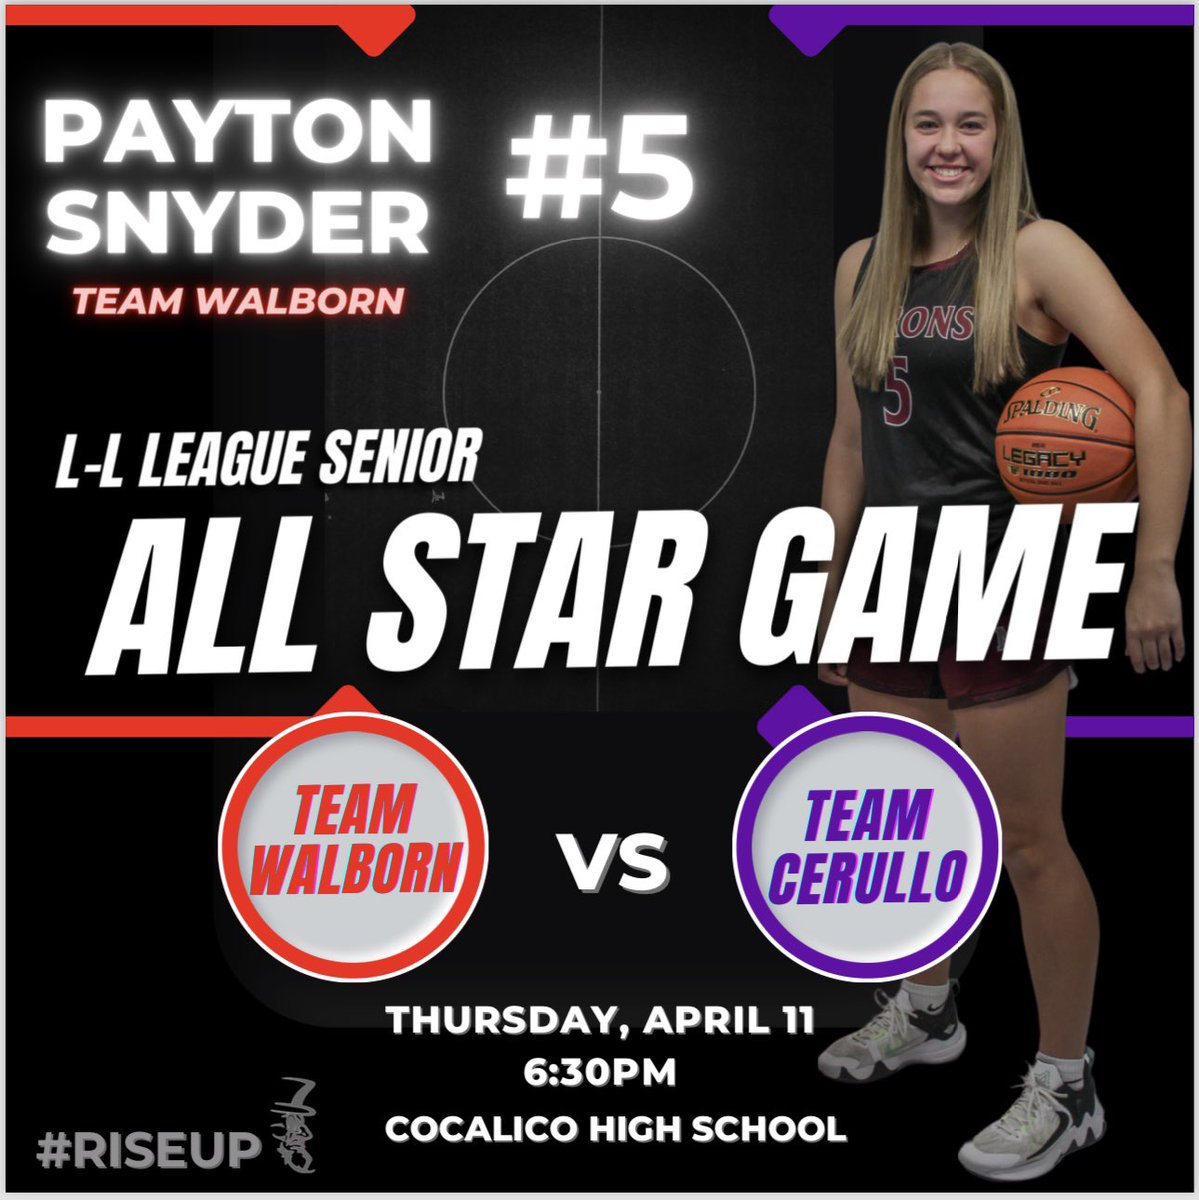 Game day! Baron Nation…#RISEUP 🏀 Senior Payton Snyder will be representing Manheim Central tonight on Team Walborn in the L-L League Senior All Star game. Come cheer her on! Game tips at 6:30p at Cocalico HS!